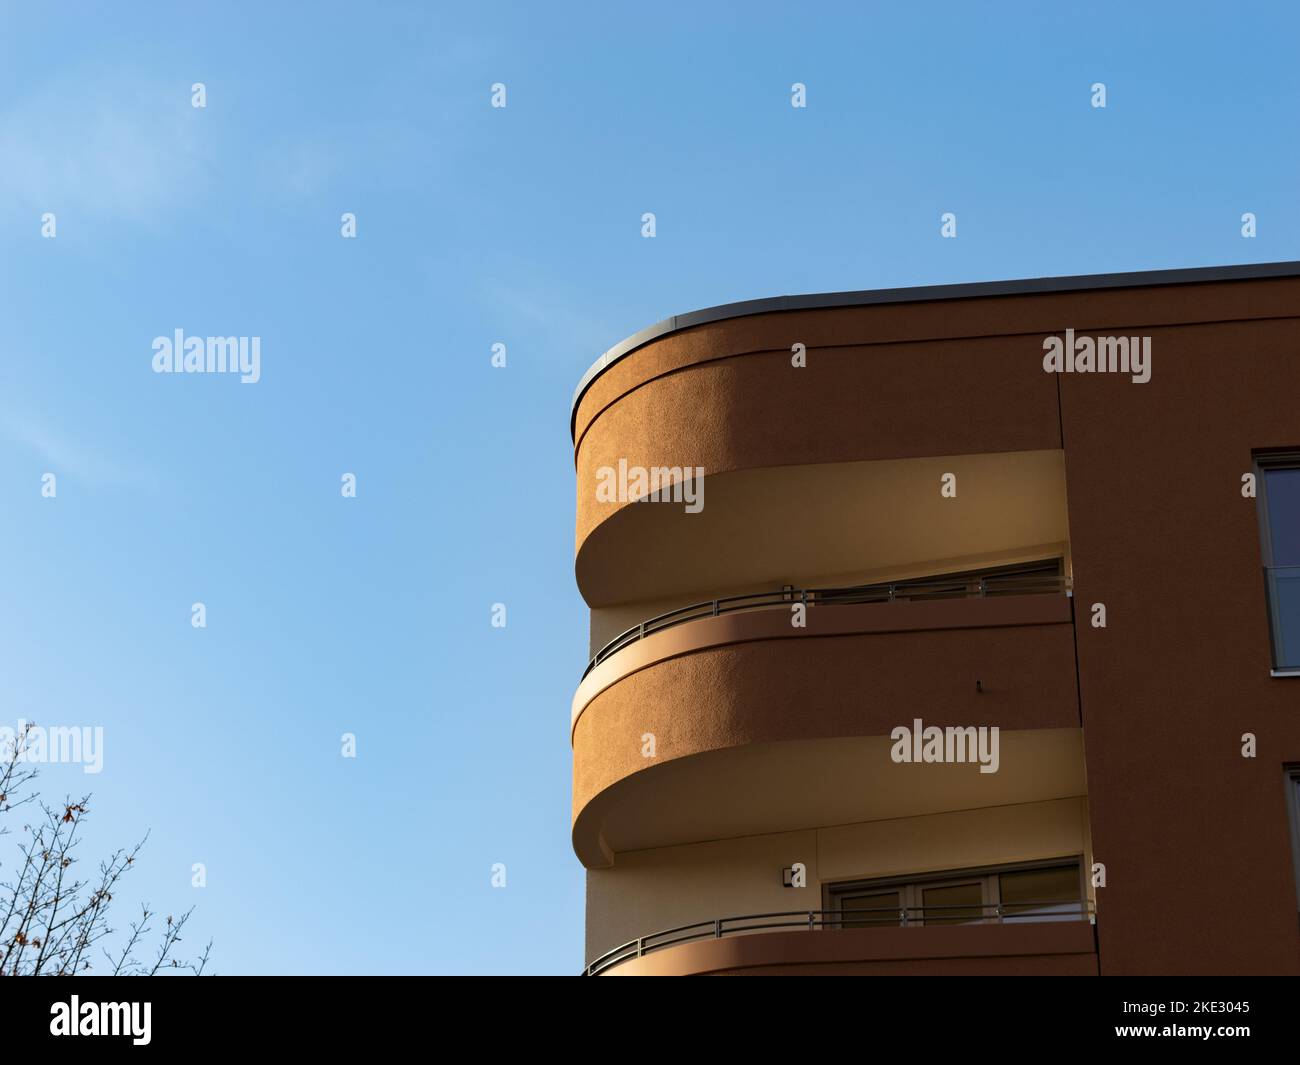 Modern balcony architecture. The facade is in a round shape at the corner of the building. The exterior is in brown color. Close-up of the design. Stock Photo